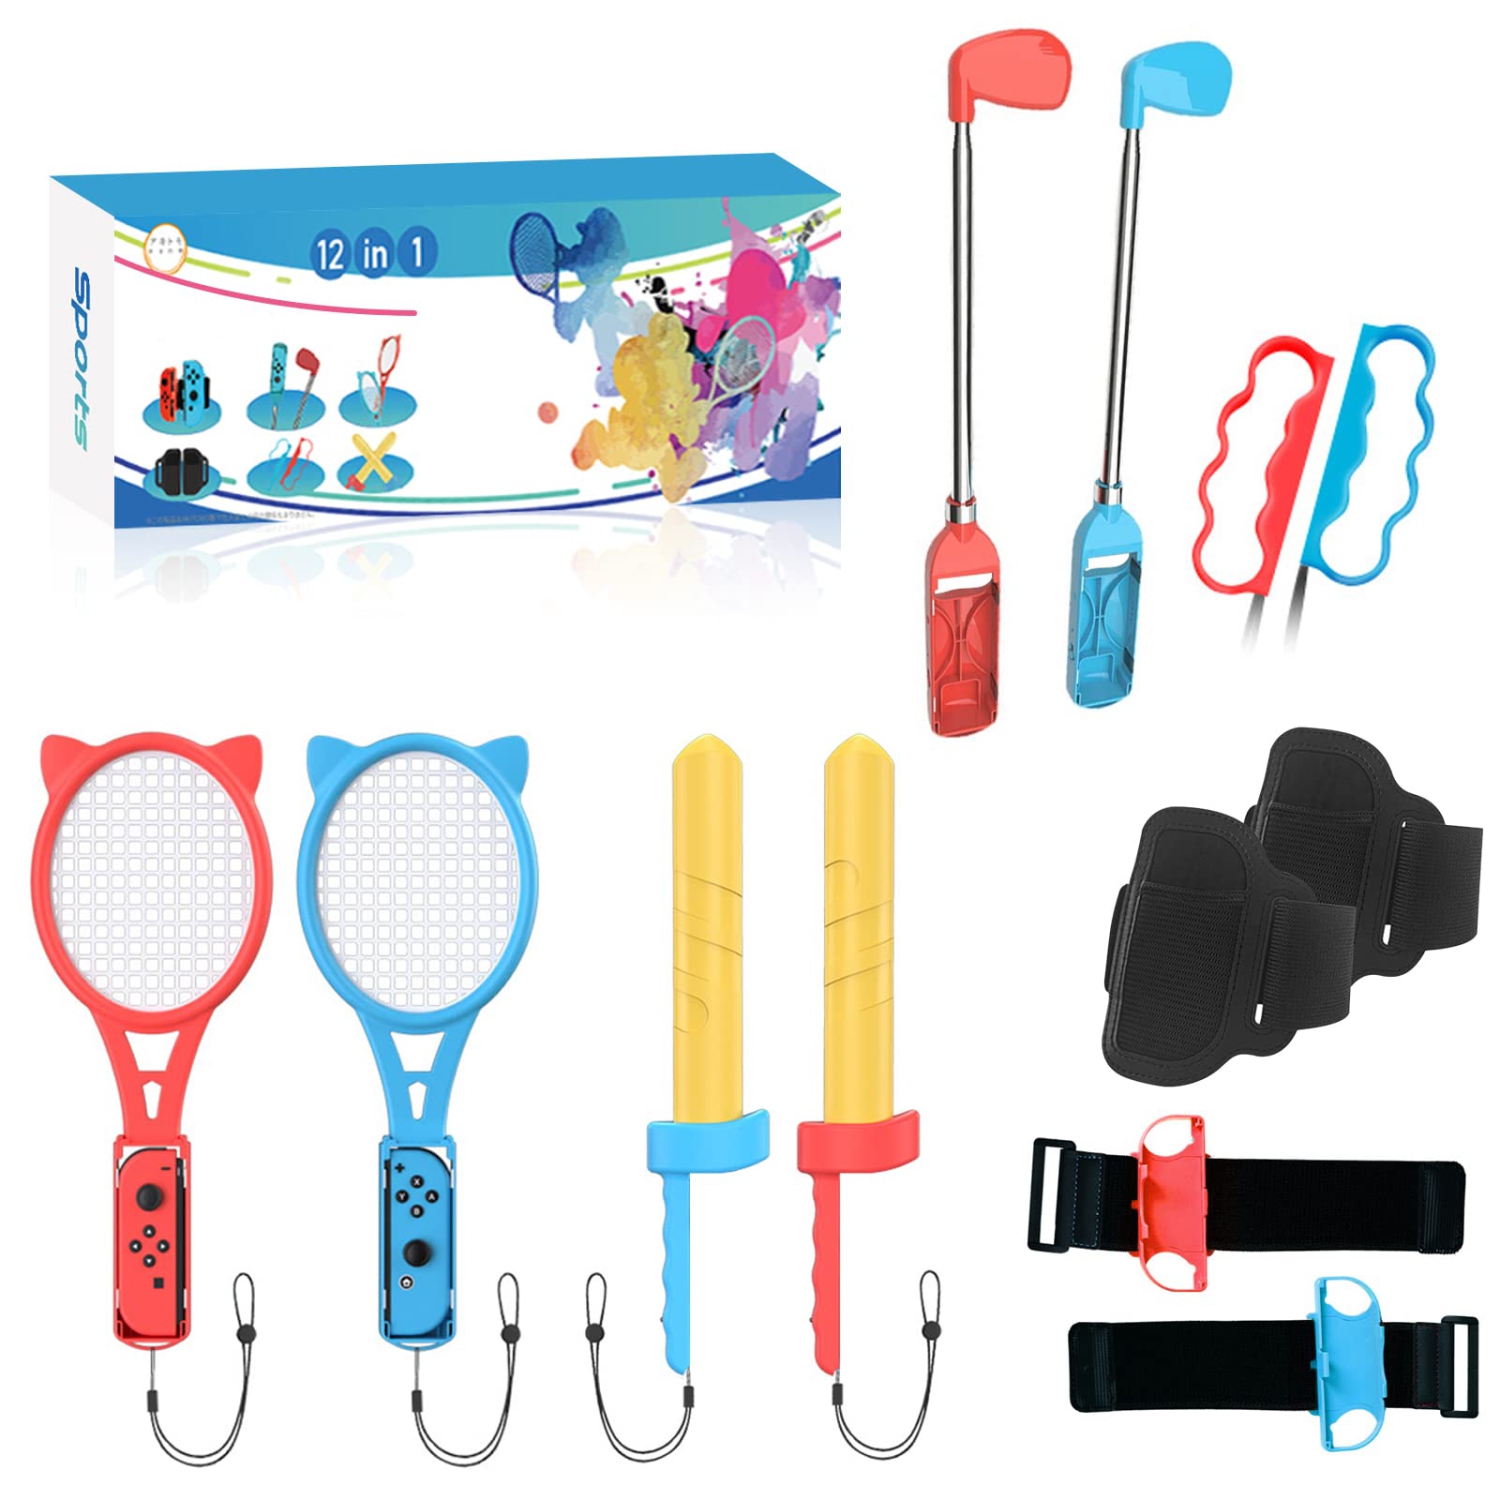 Switch Sports Accessories Bundle for Switch, 12 in 1 Family Accessories Kit with Sword, Grip, Golf Clubs, Leg Straps, Tennis